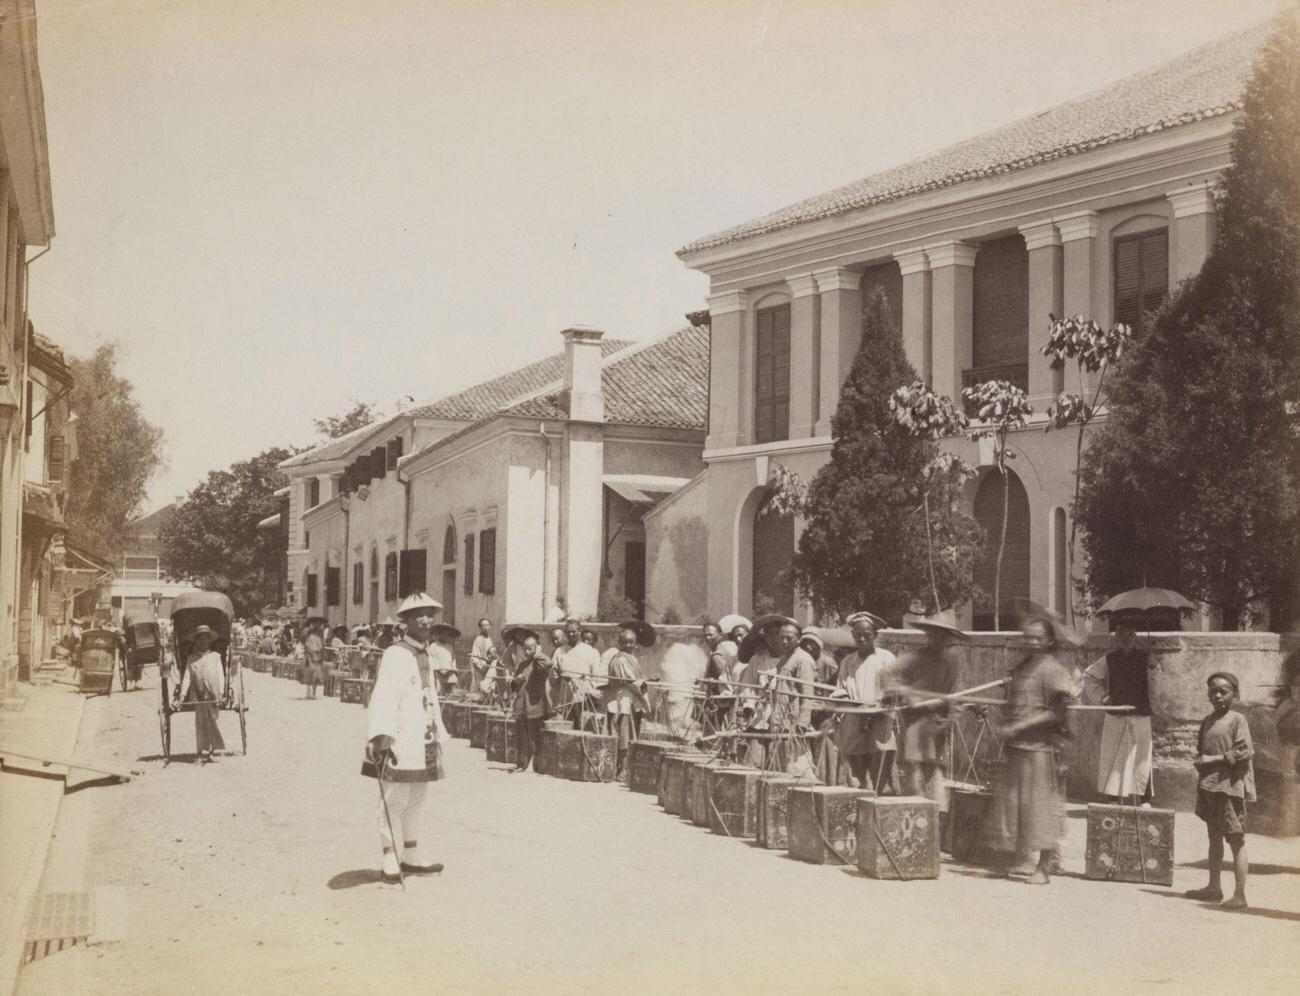 Carrying Half-Chests of Tea, Hankou, China, 1875